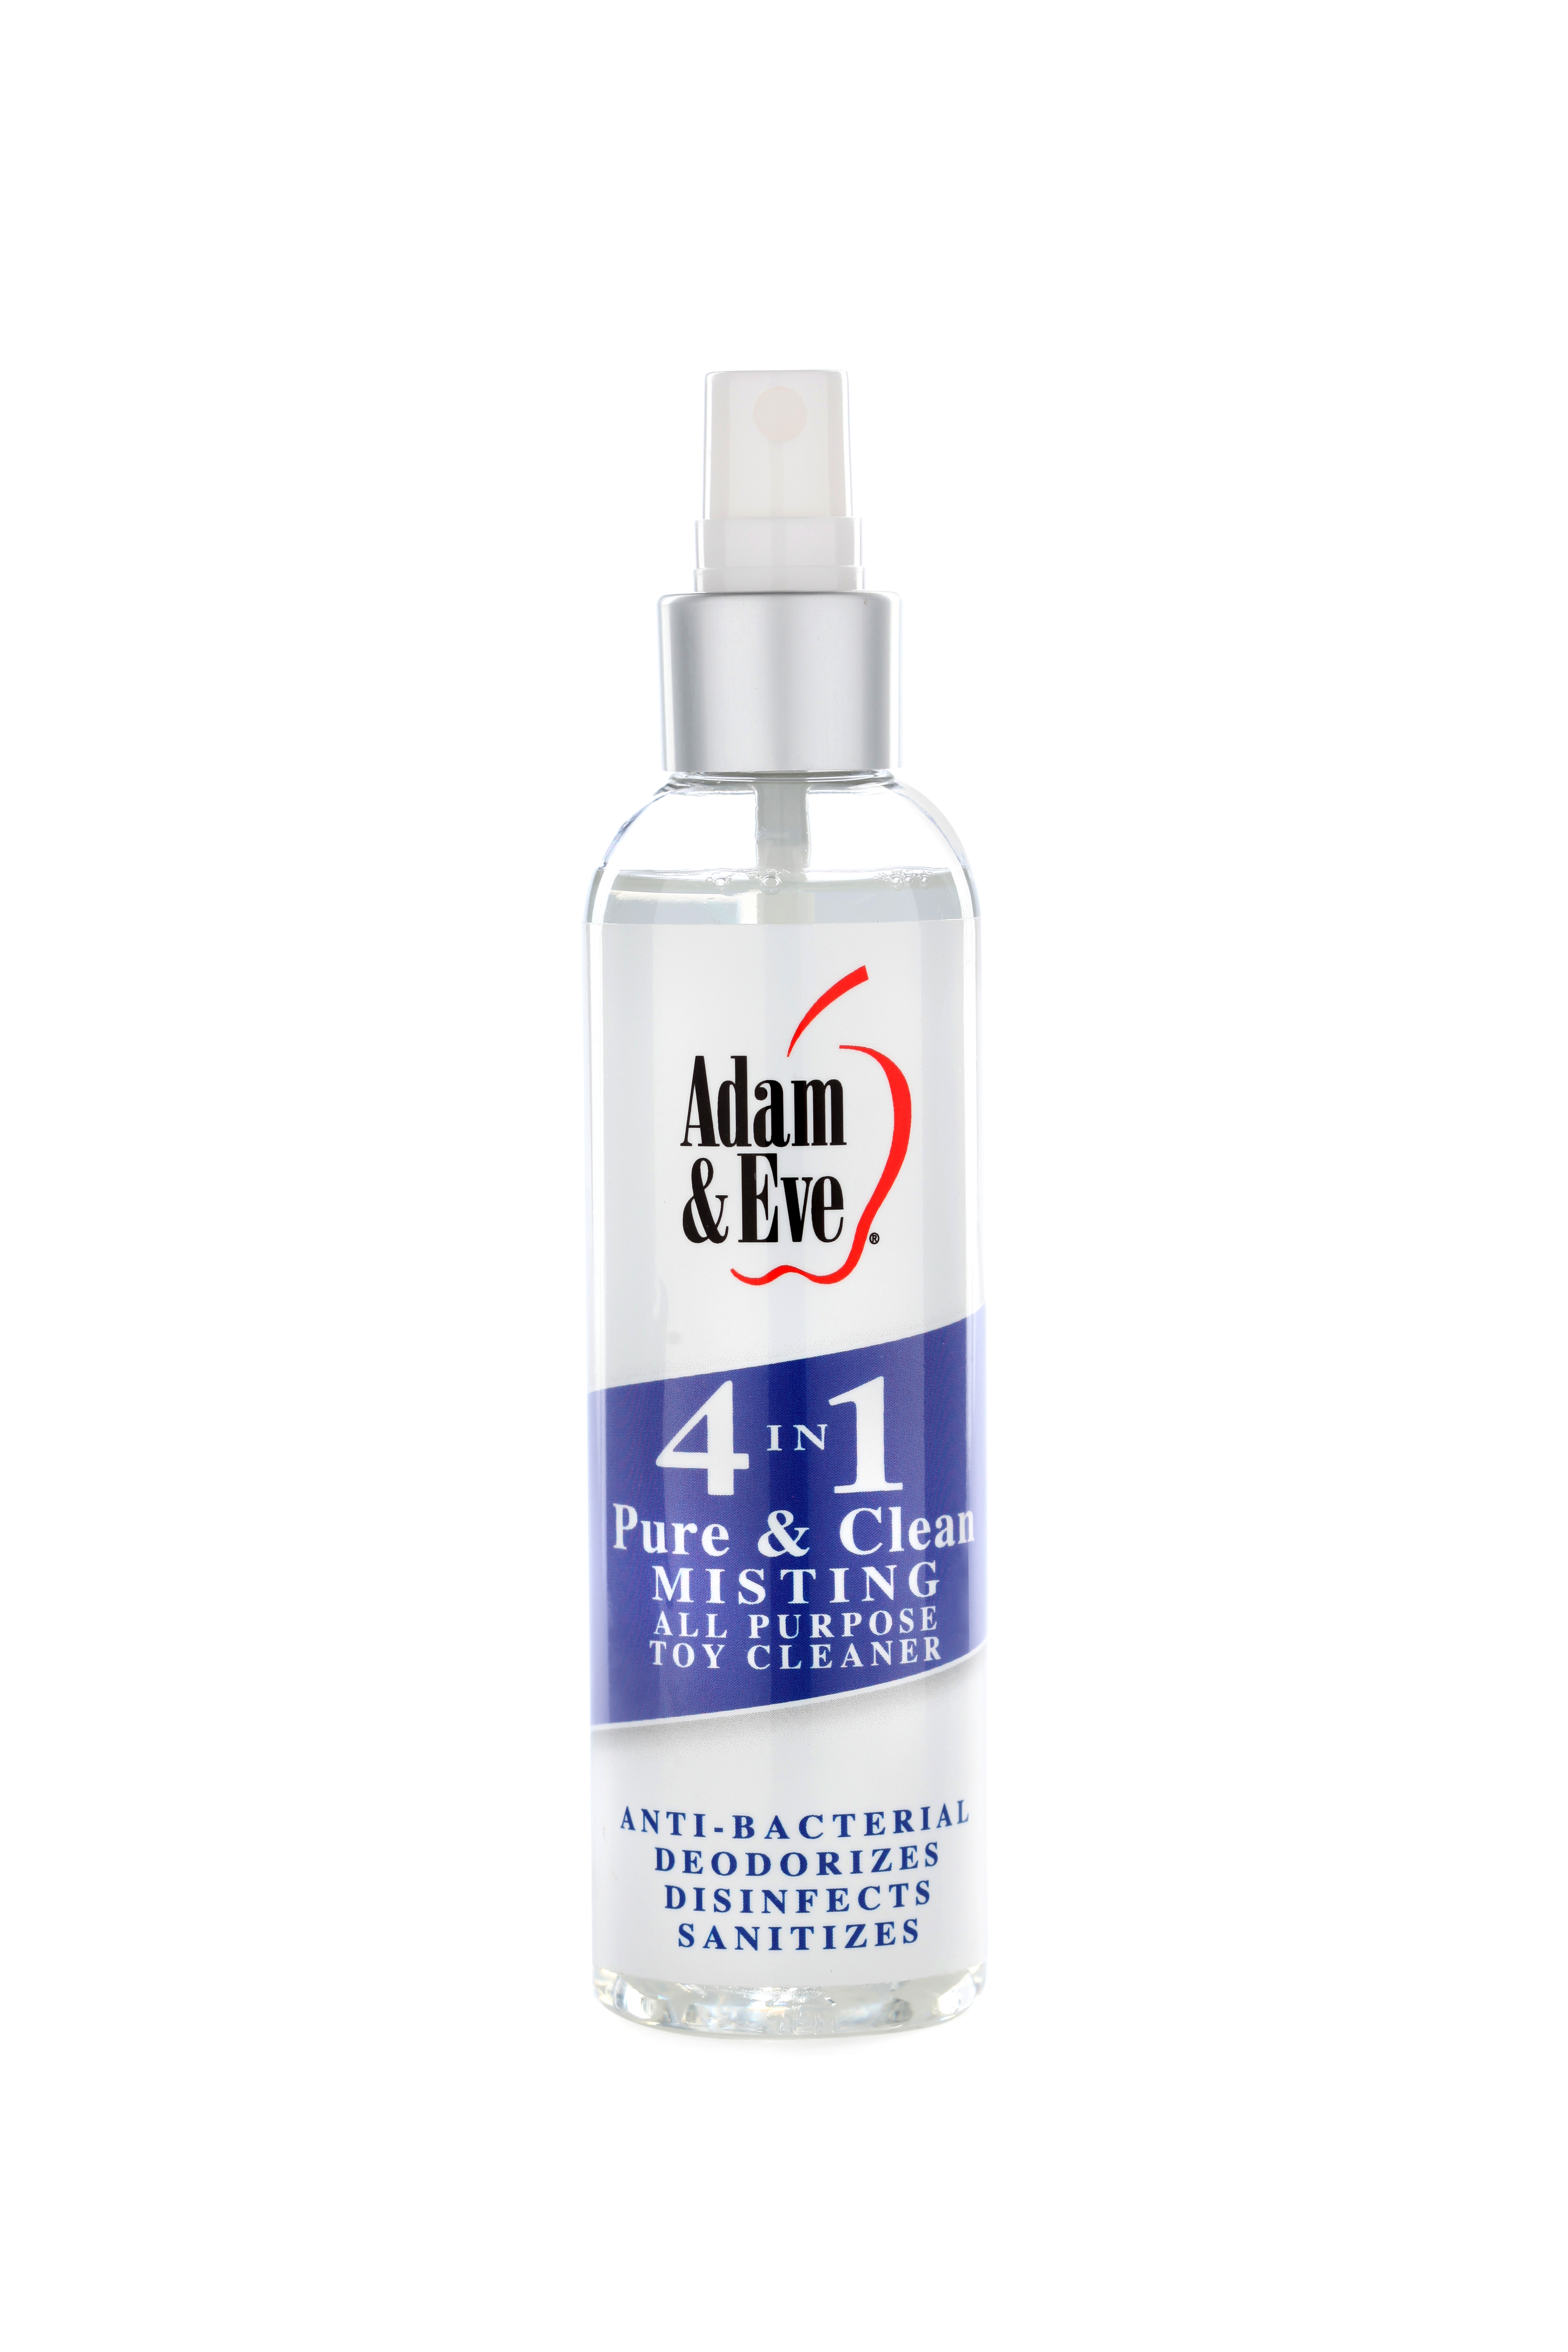 ADAM & EVE PURE & CLEAN MISTING TOY CLEANER 4OZ  